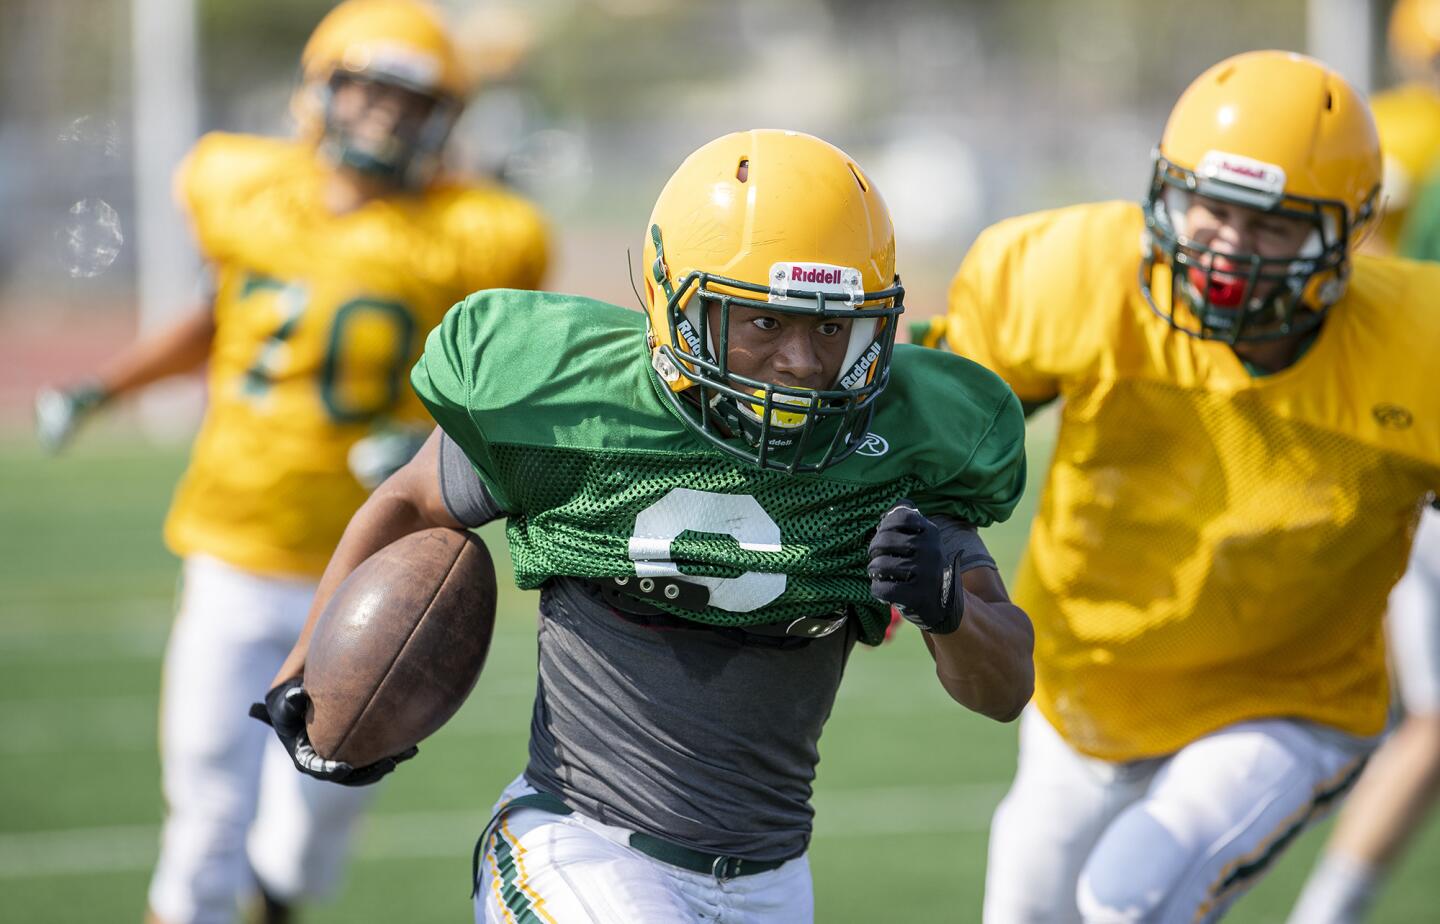 Edison's Isaiah Palmer carries the ball during practice on Saturday, August 11.